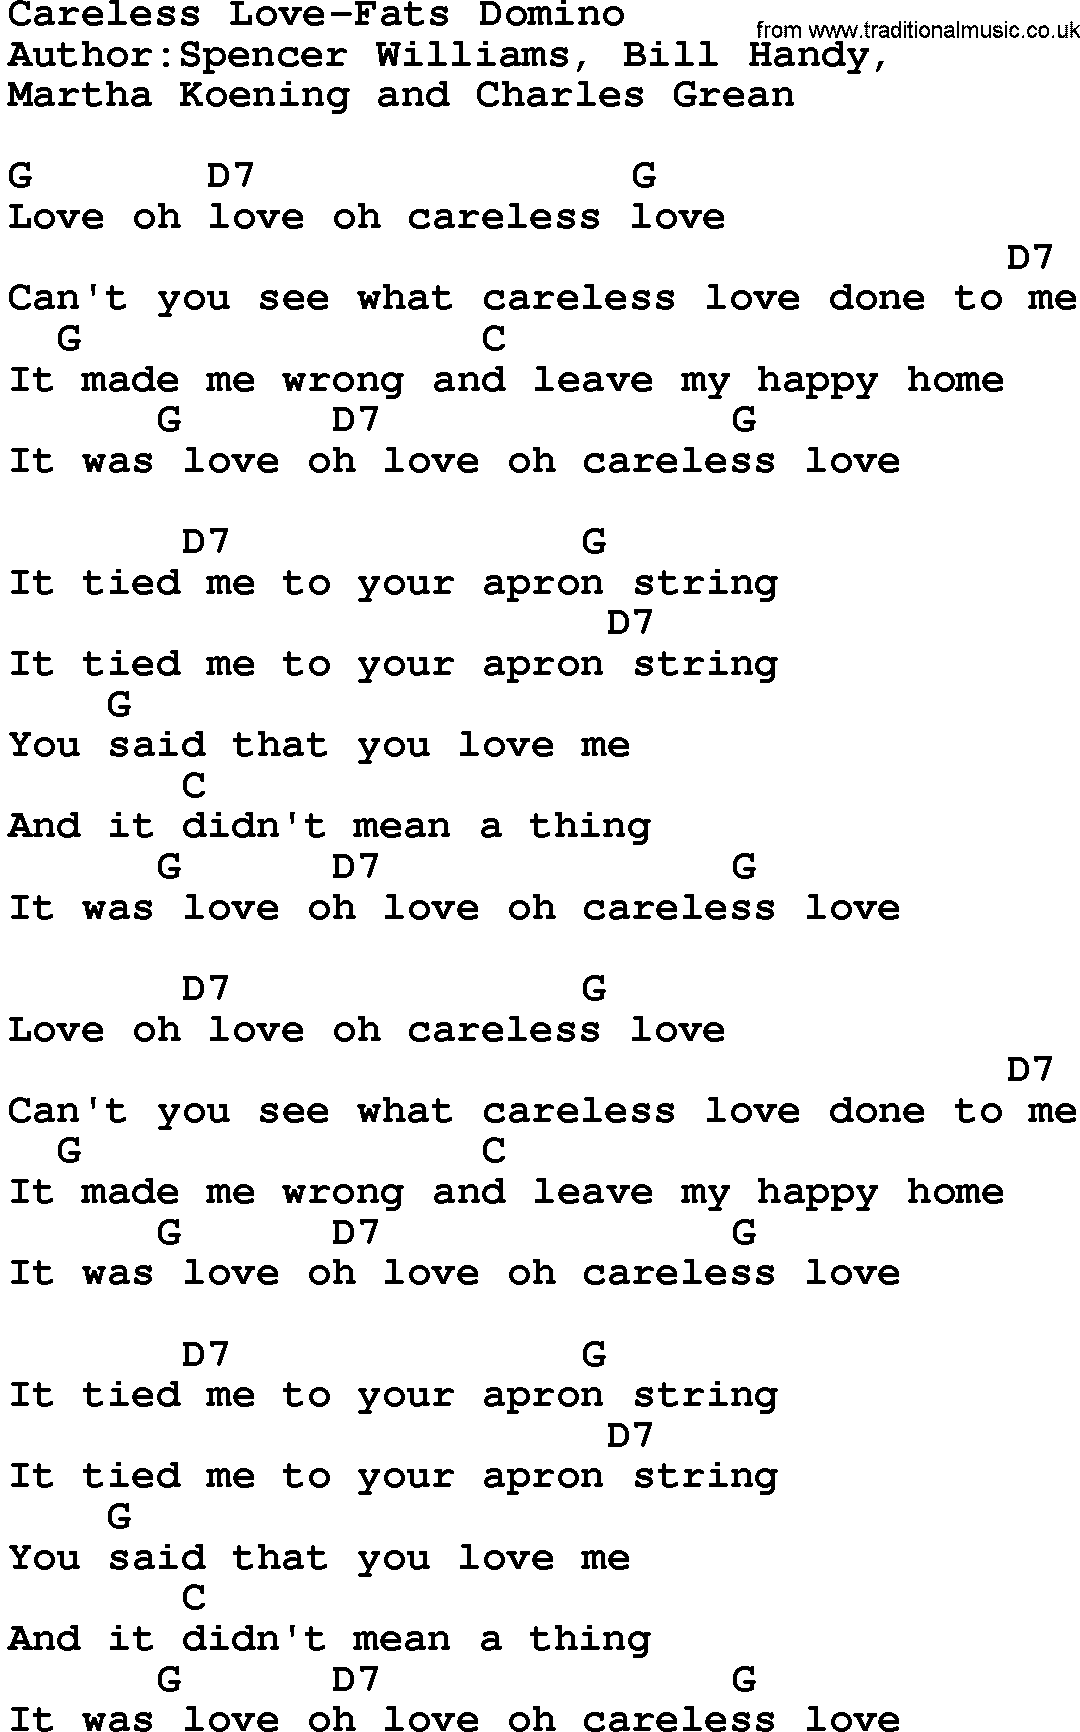 Country music song: Careless Love-Fats Domino lyrics and chords